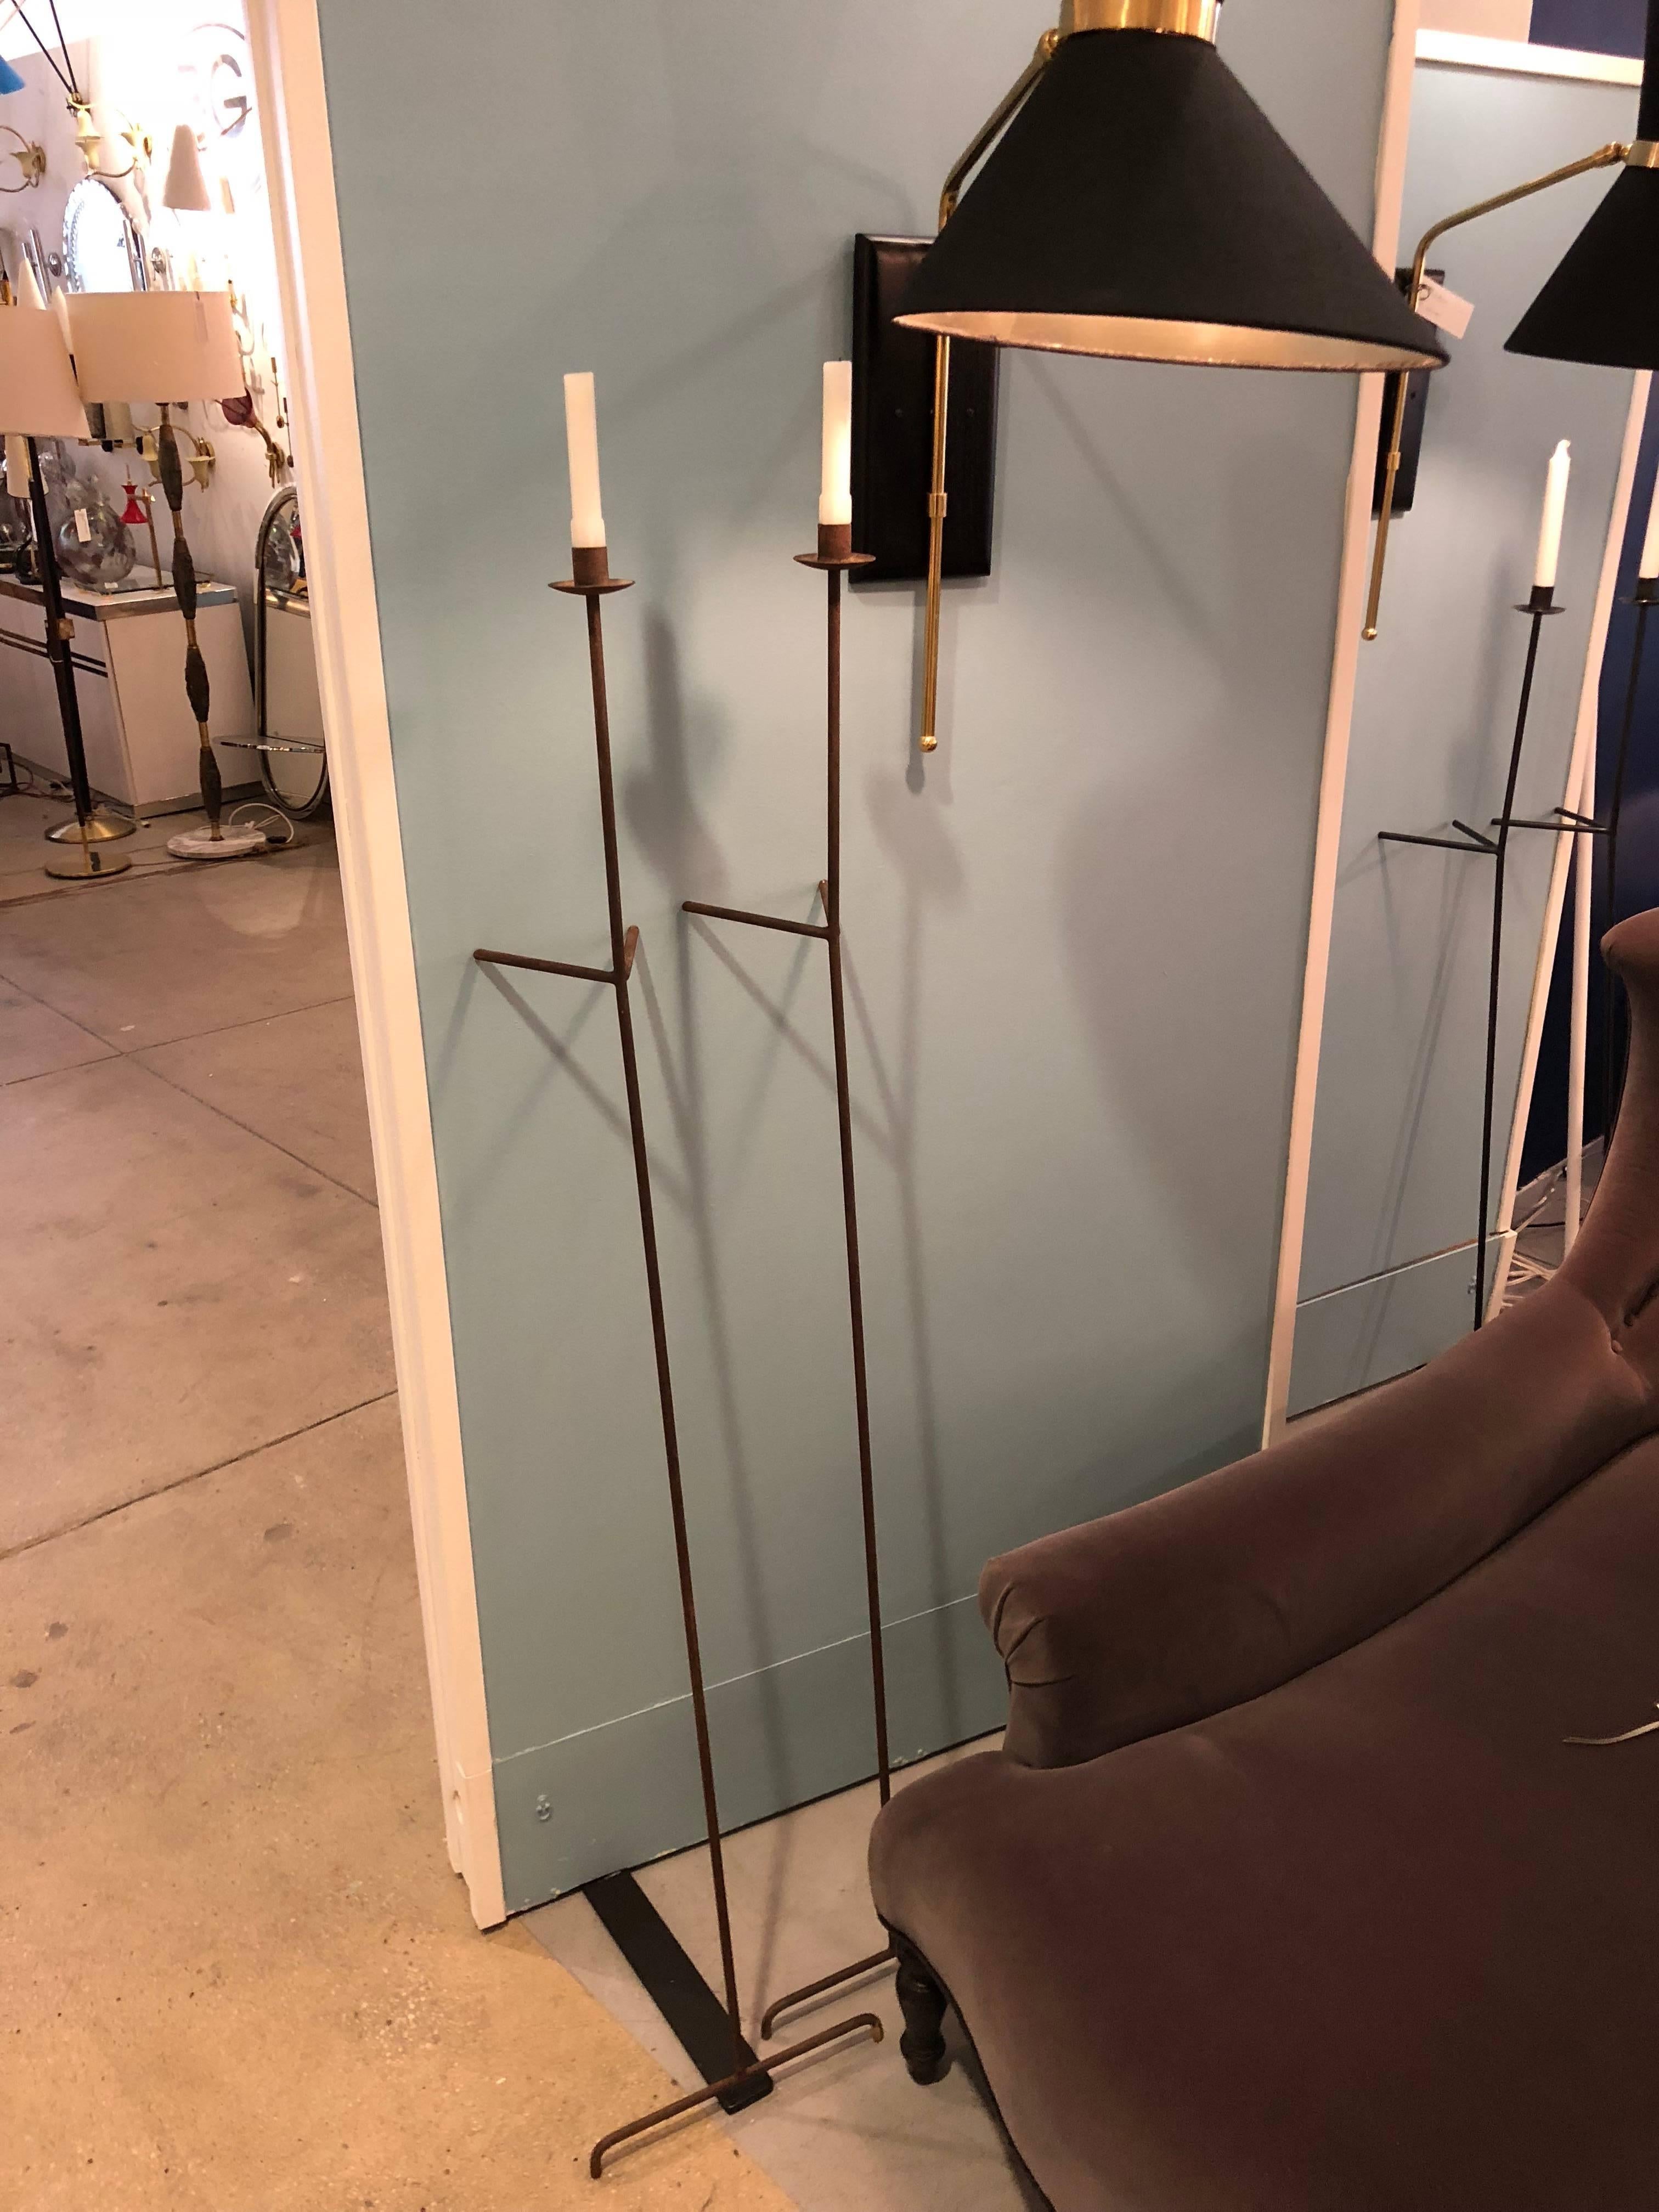 Single versatile candleholder. It leans against the wall and can be place almost everywhere to provide lighting. These candleholders are rusted steel and can go anywhere. They each use one taper candle each.